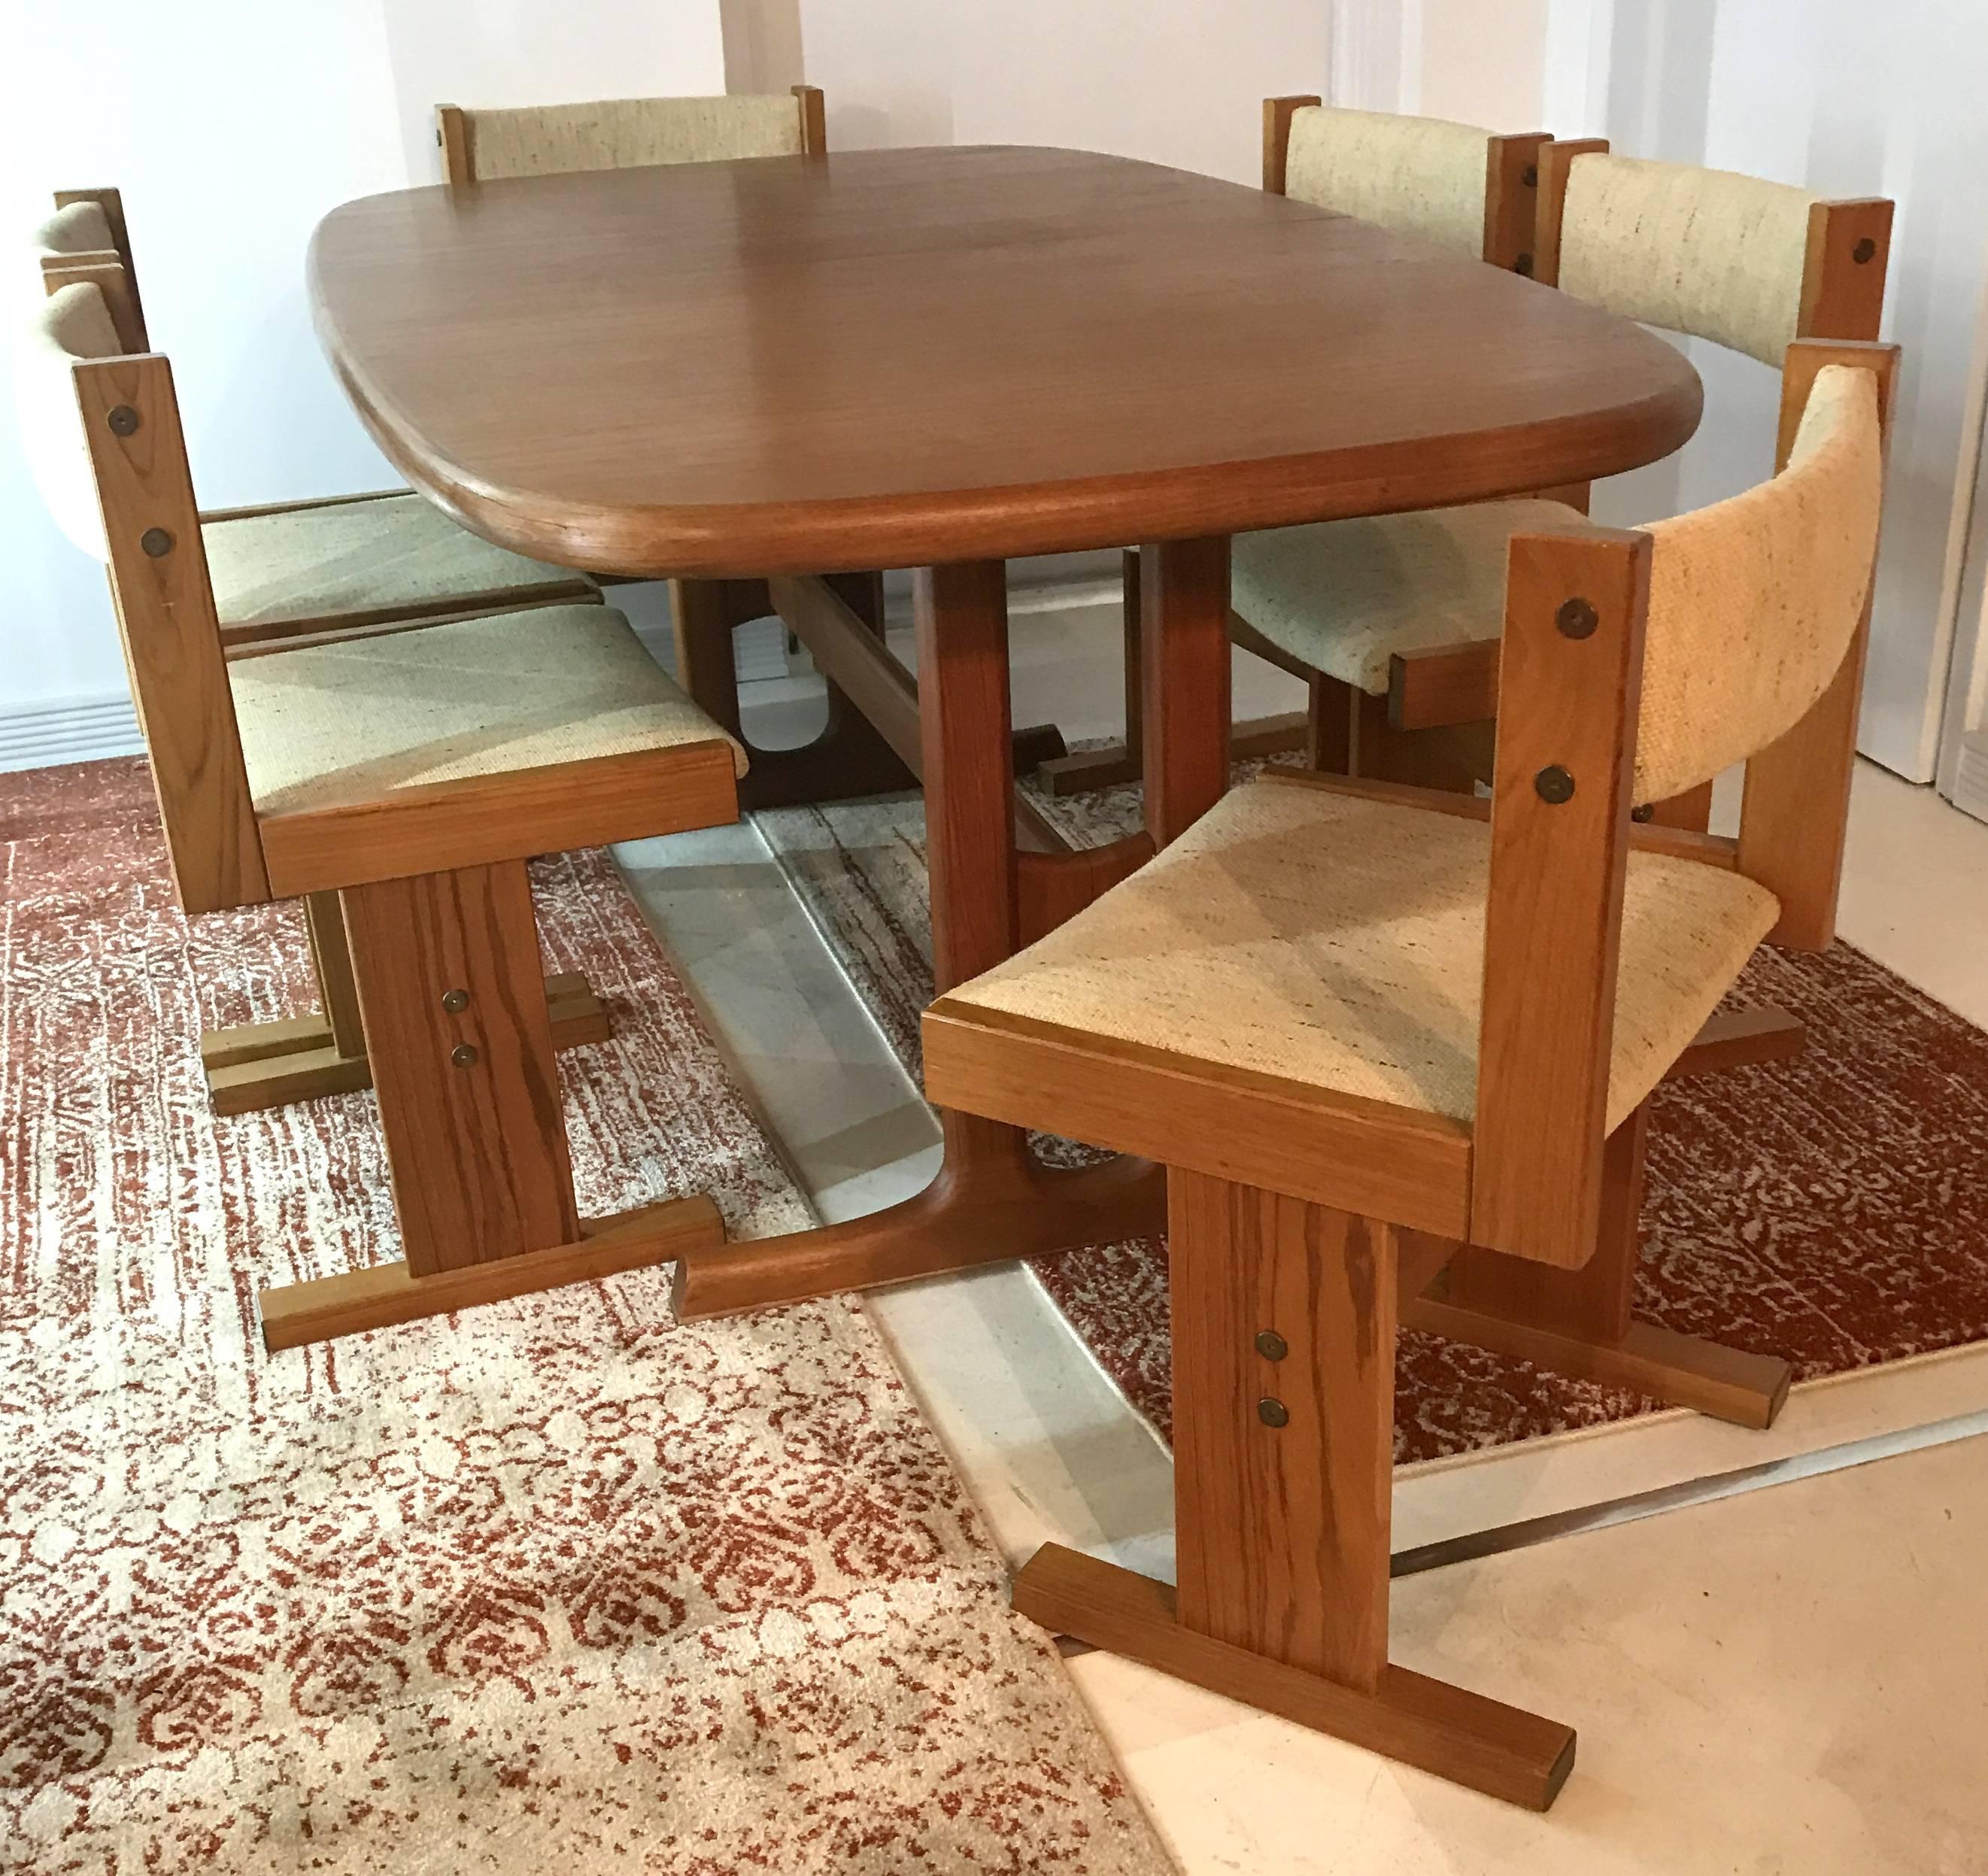 Mid-century Danish teak dining table extends by inserting the hidden leaf stored in a compartment under the table. The leaf adds 19.5